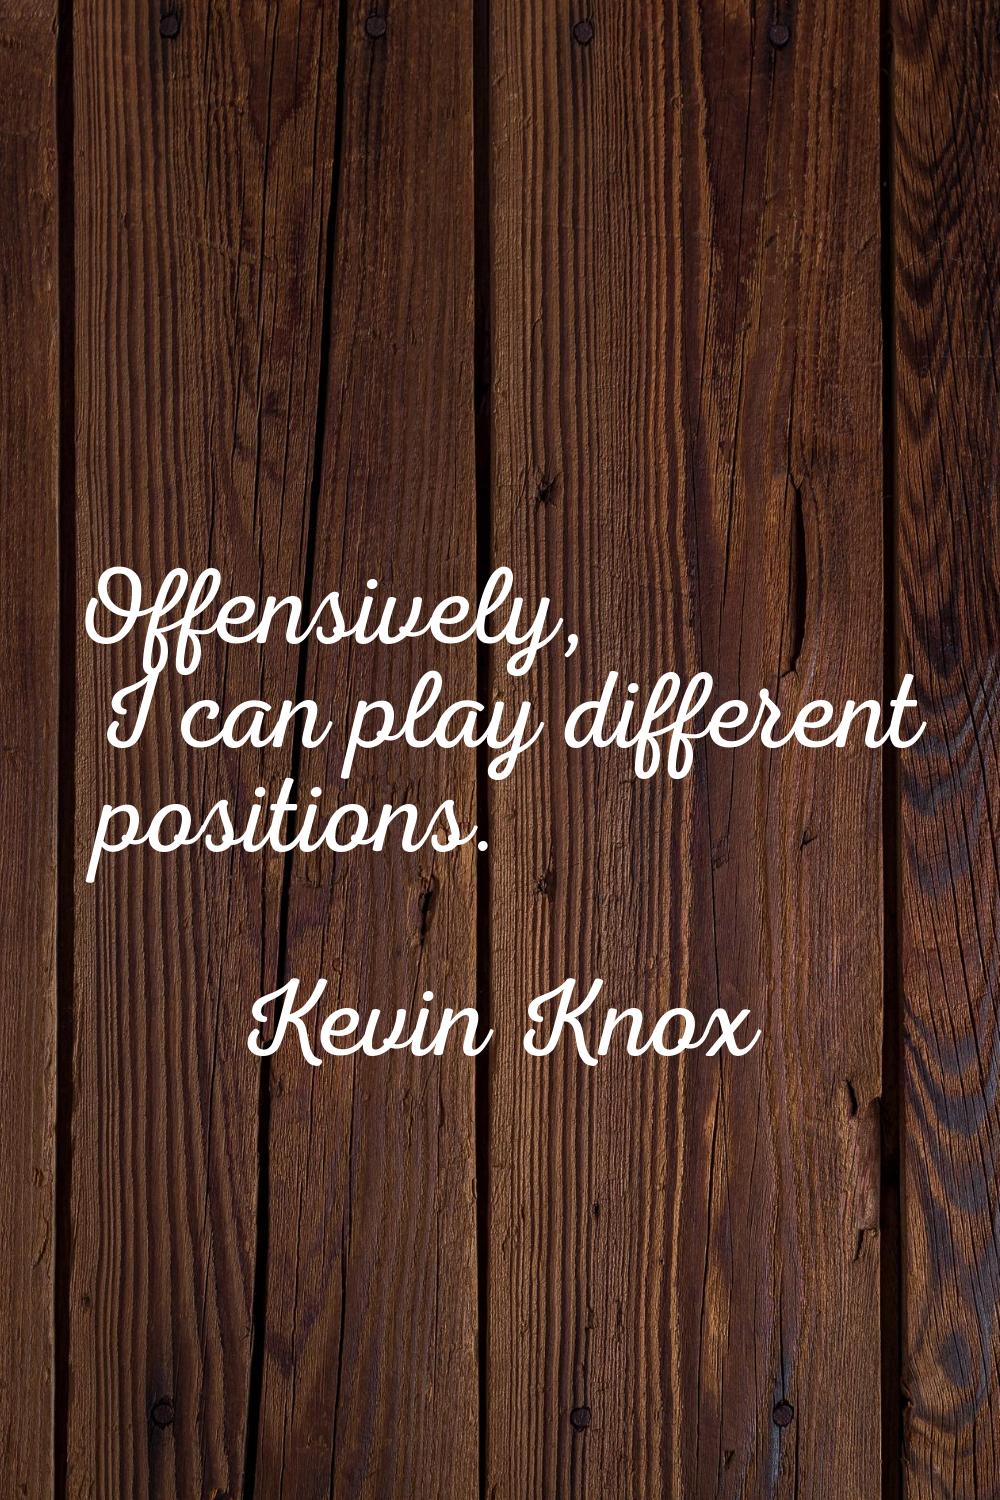 Offensively, I can play different positions.